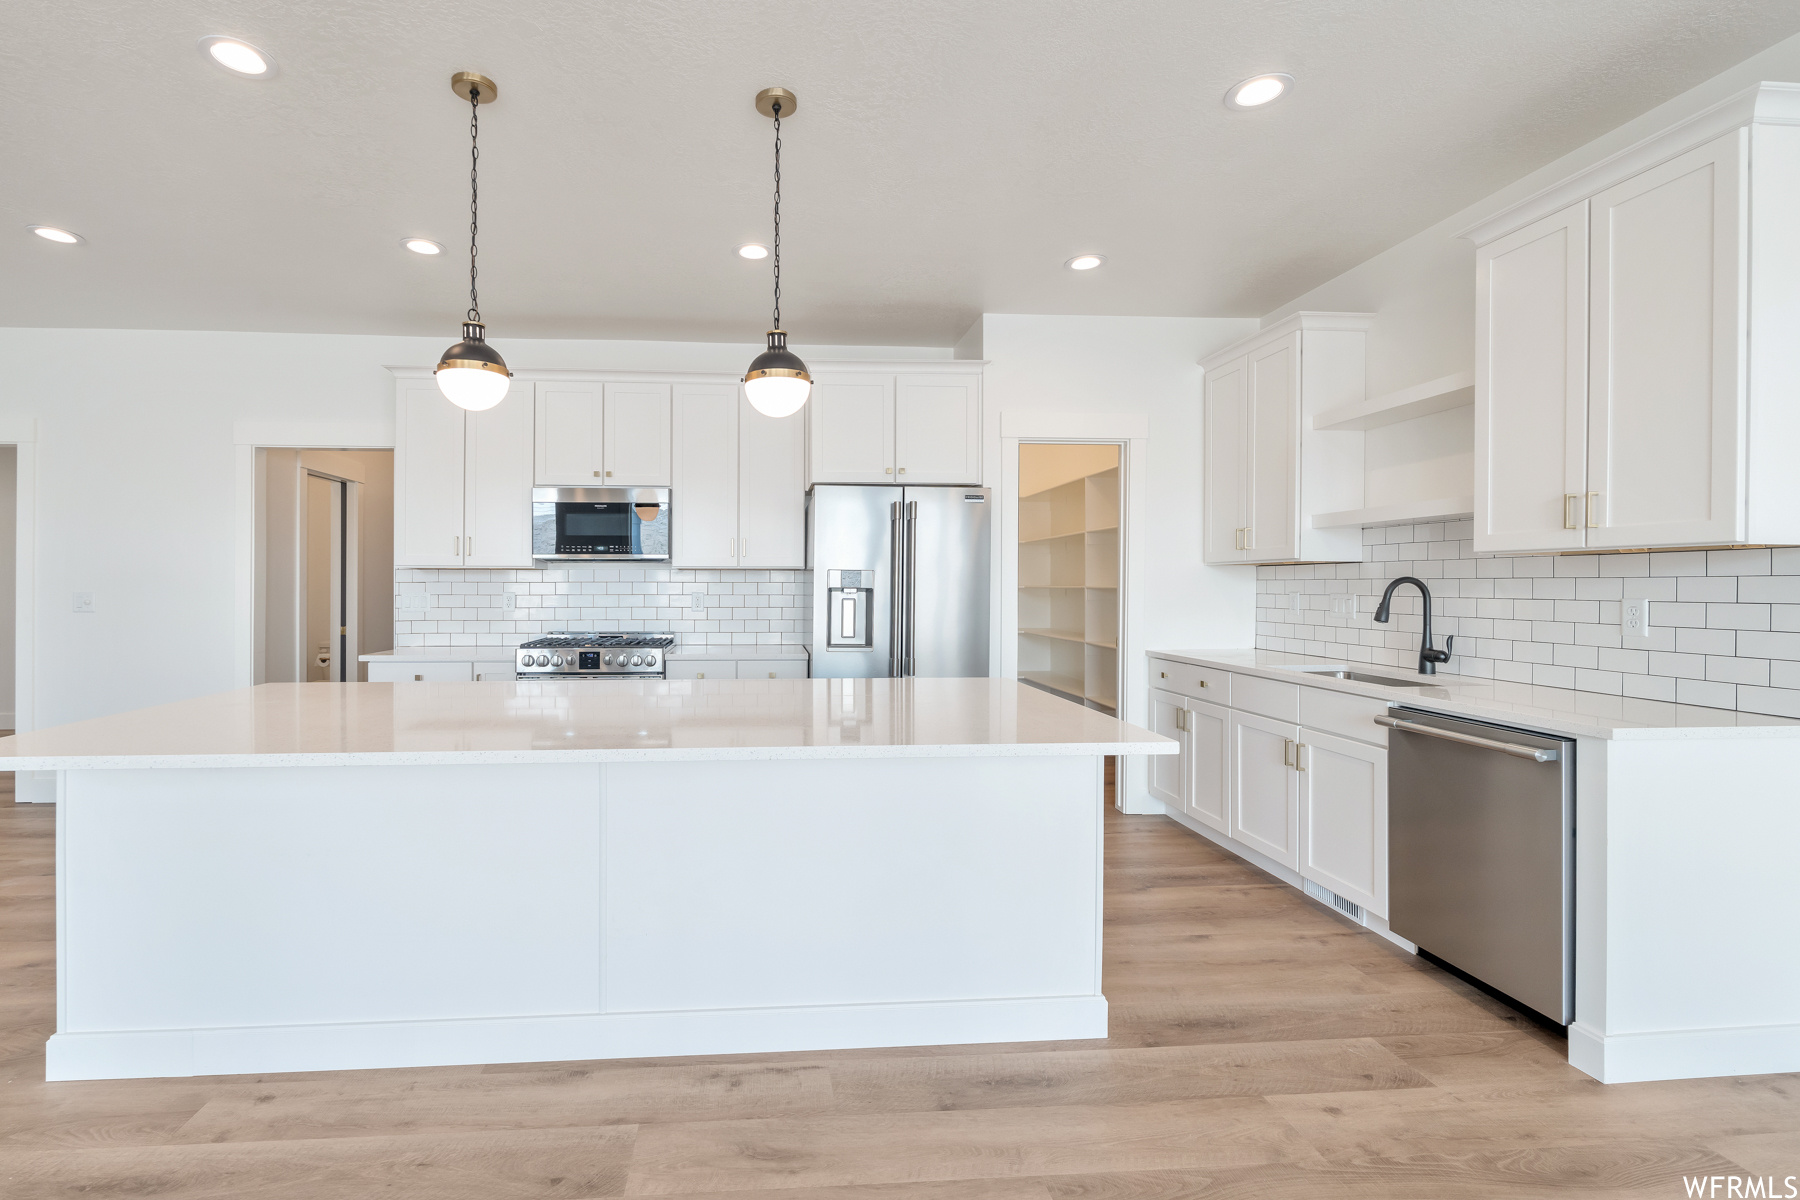 Kitchen featuring refrigerator, stainless steel dishwasher, microwave, light countertops, light hardwood flooring, pendant lighting, and white cabinets